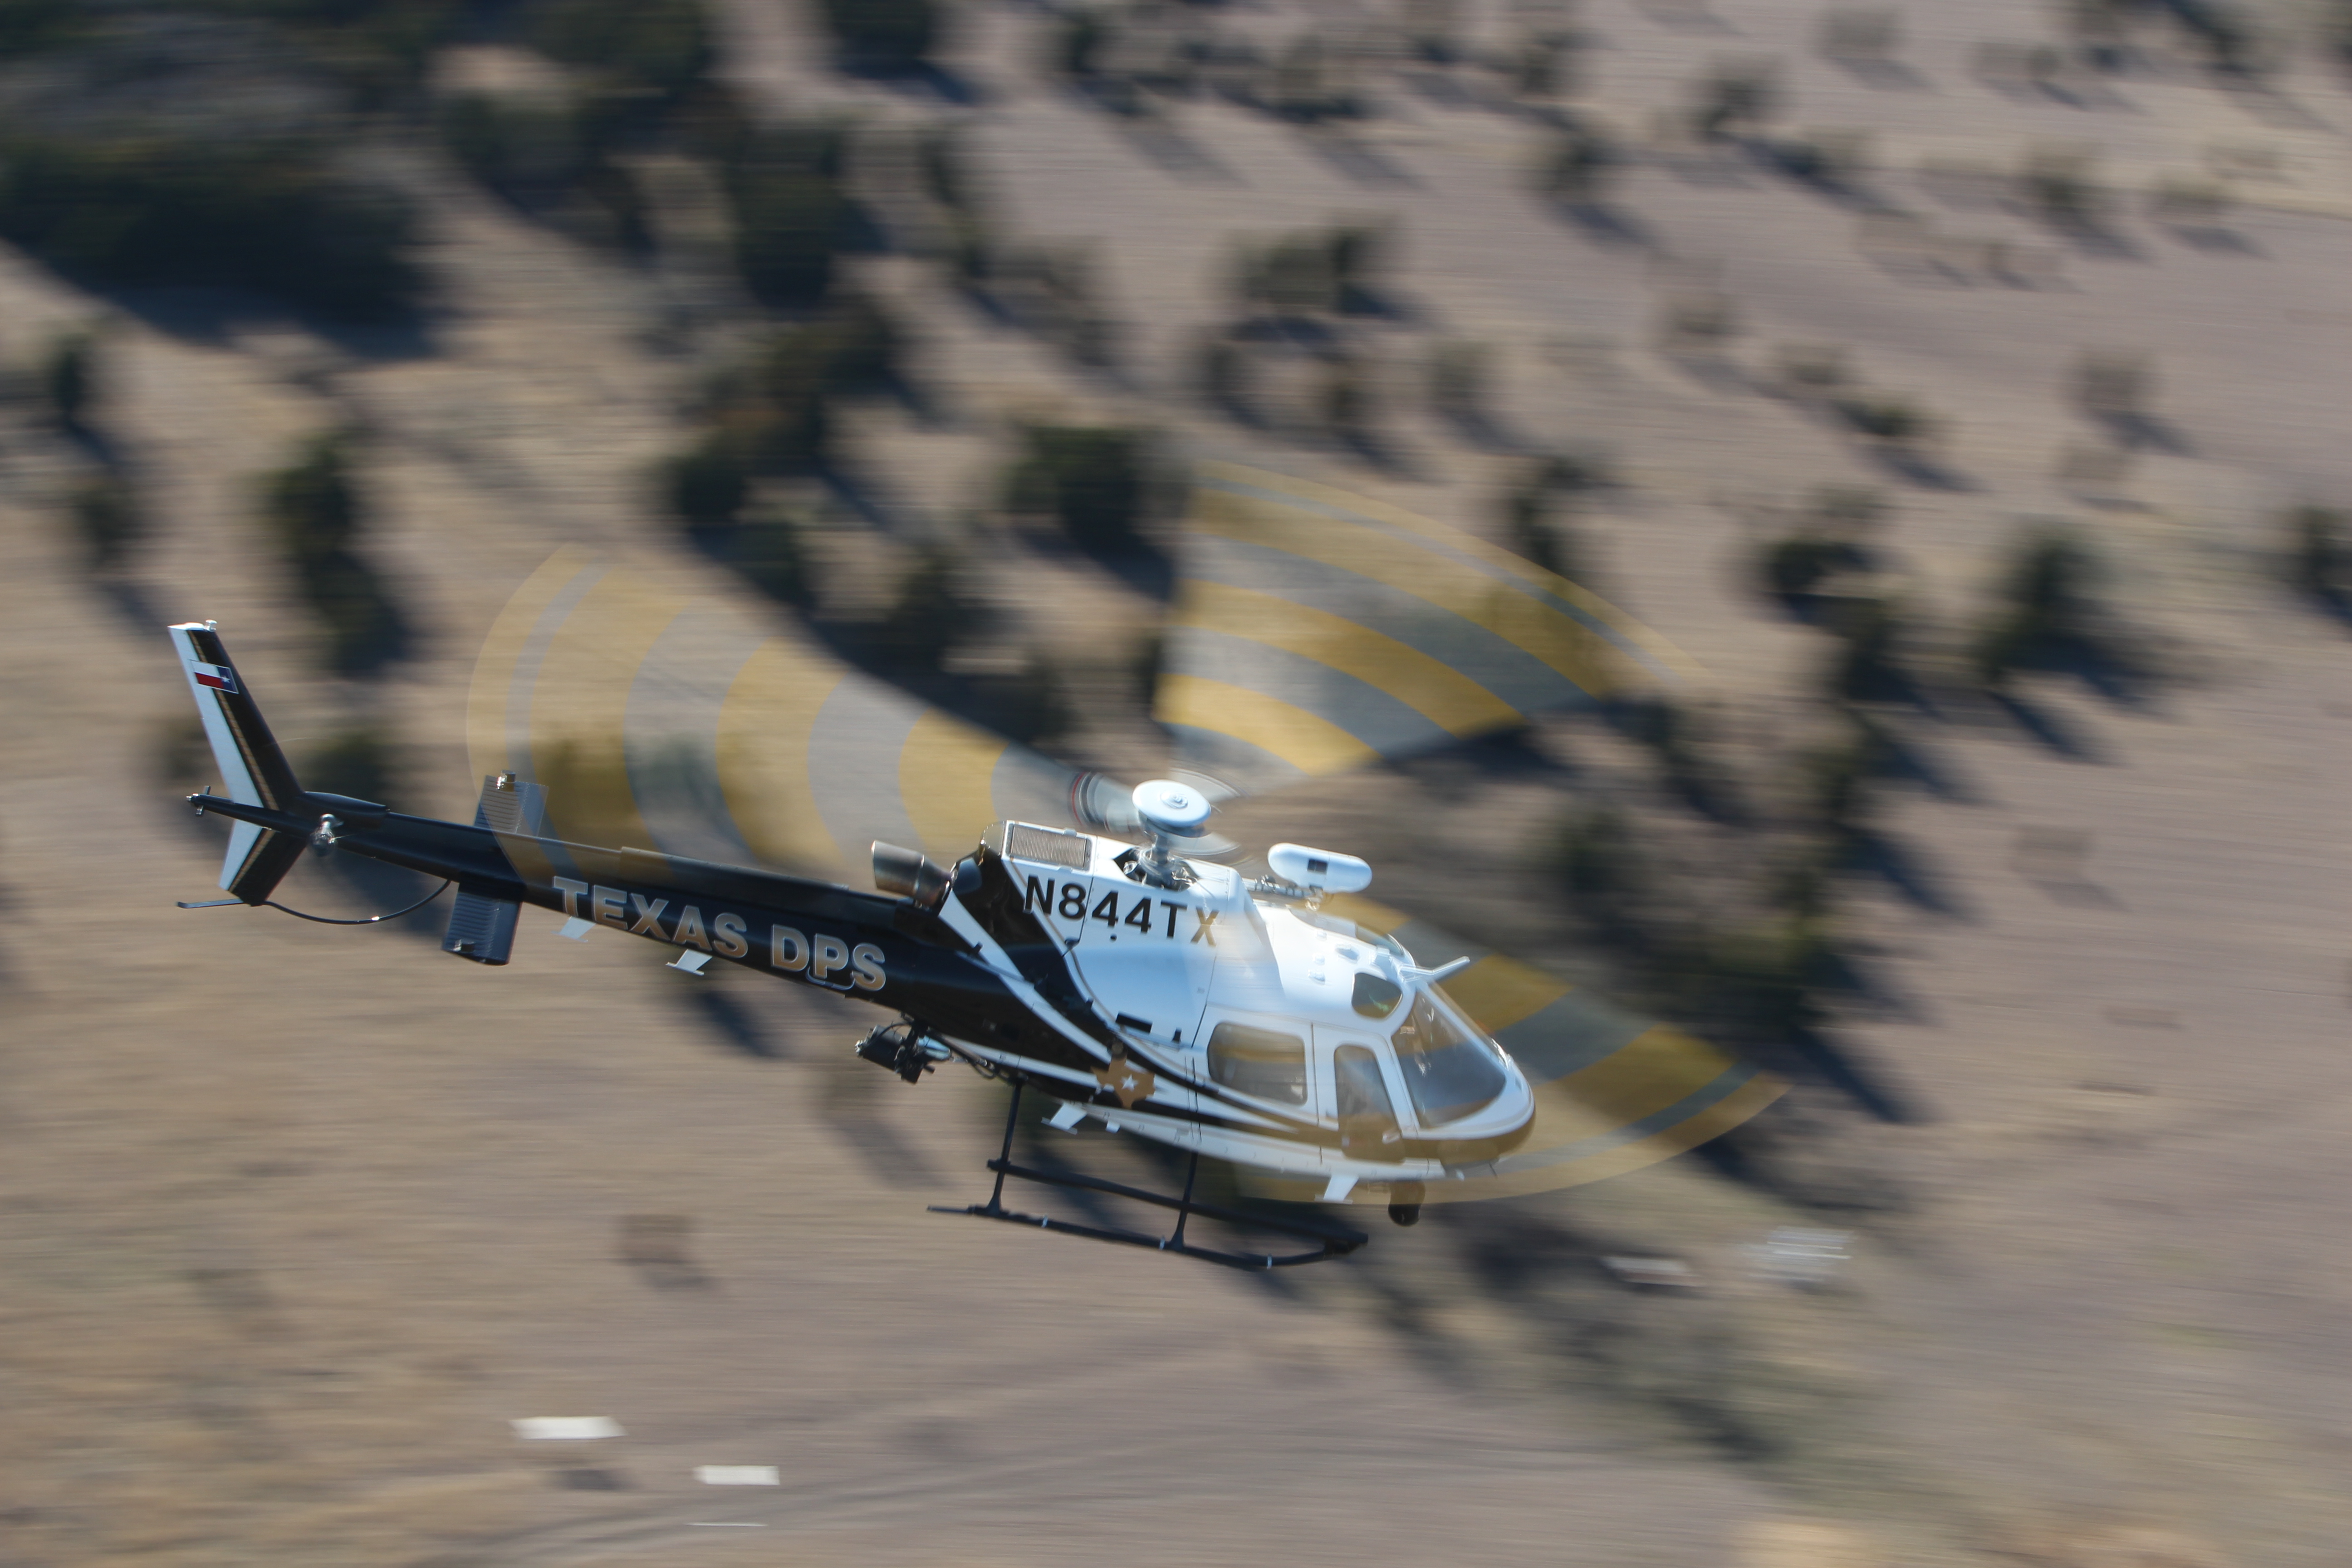 DPS helicopter heading to call